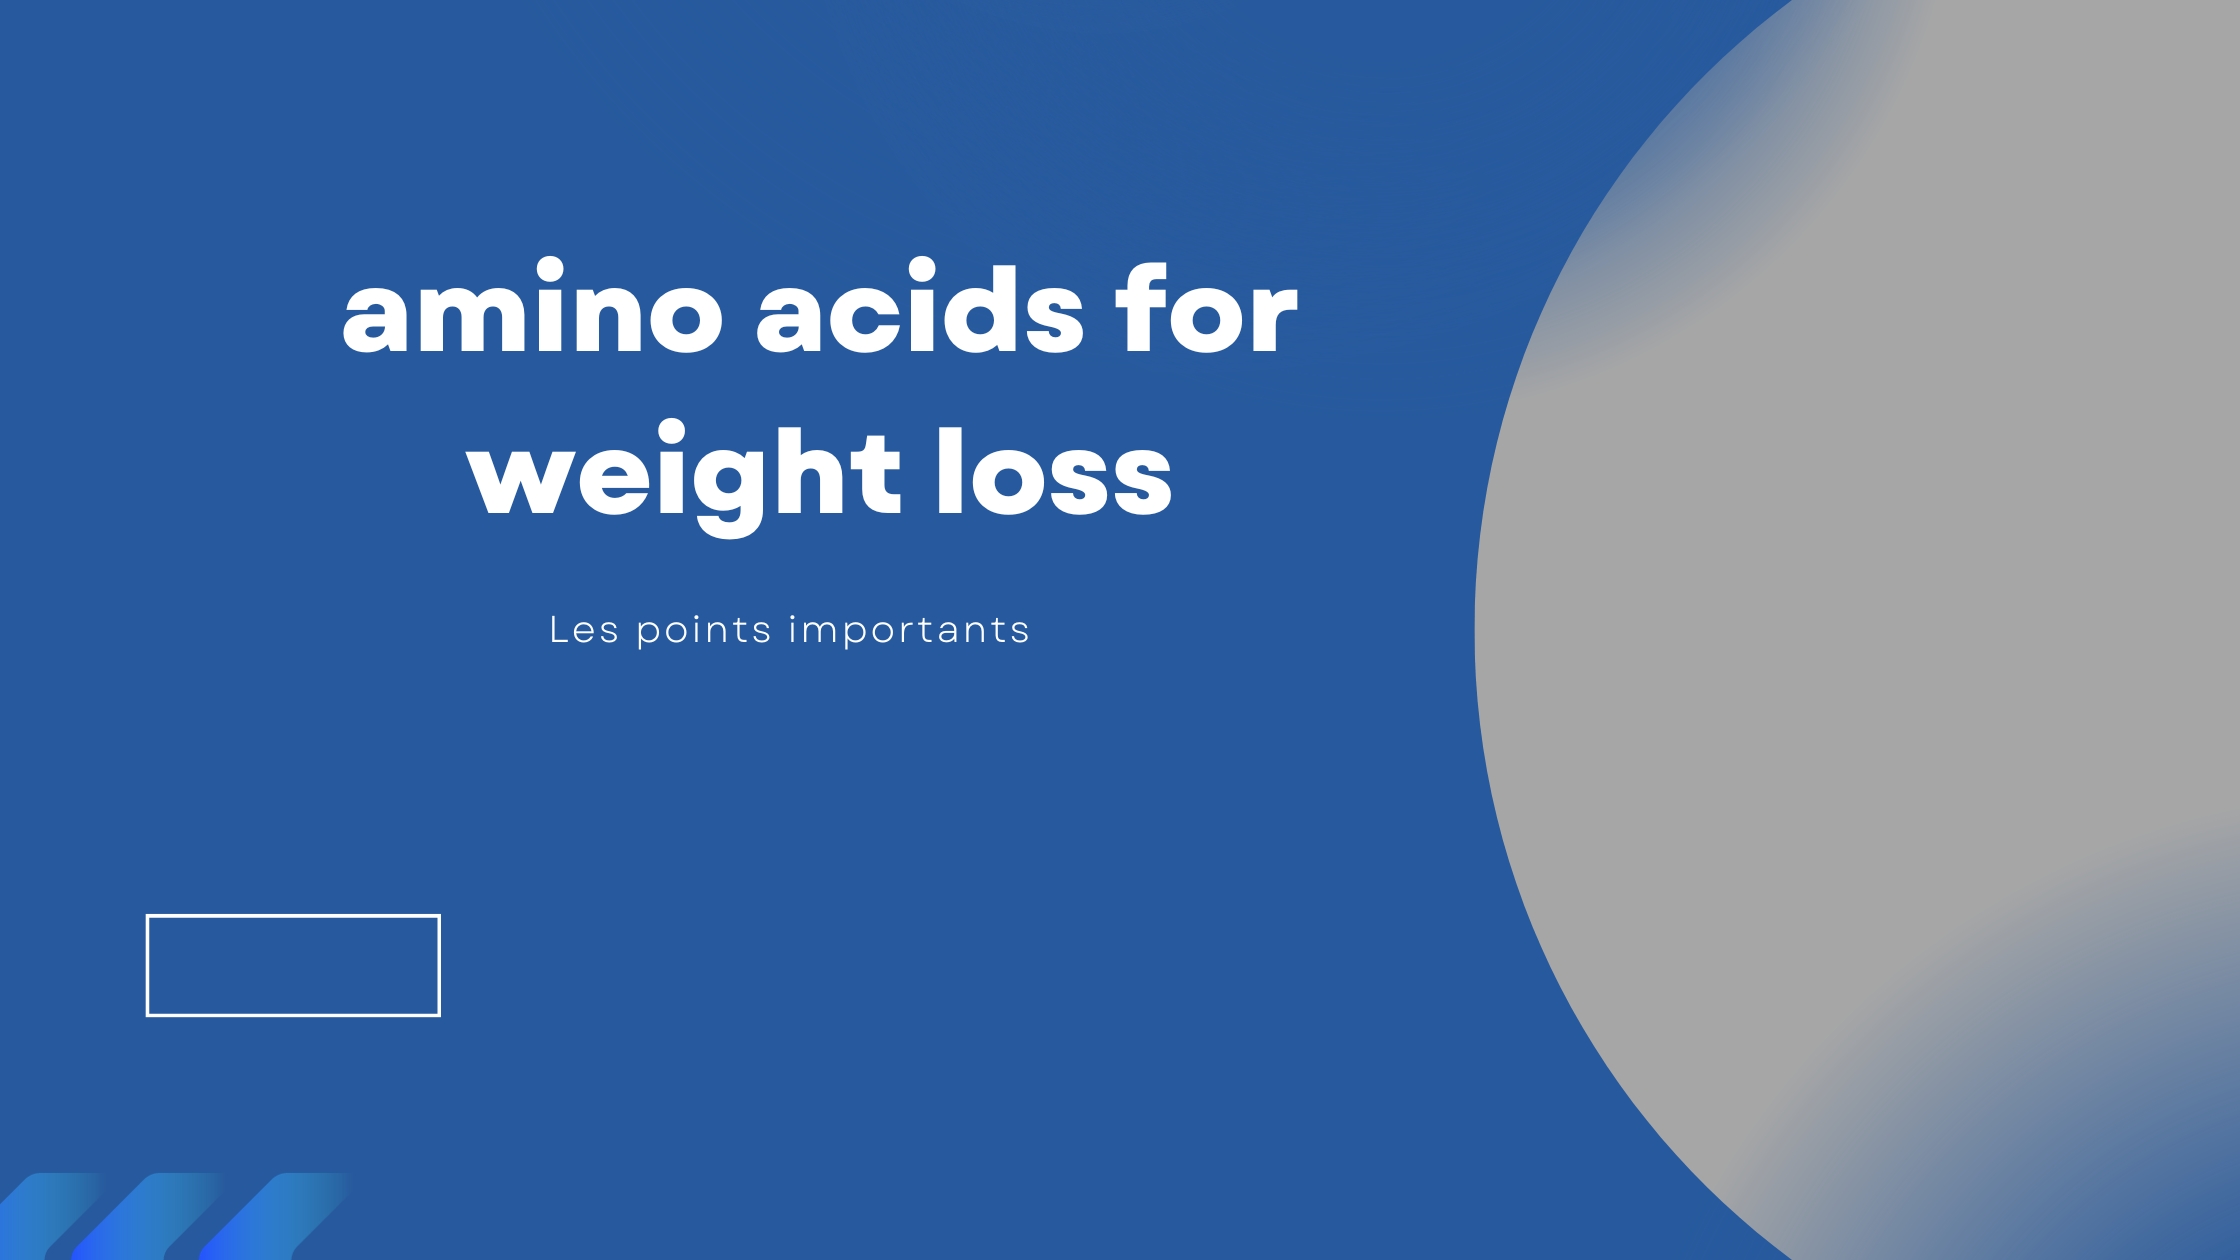 amino acids for weight loss | Les points importants